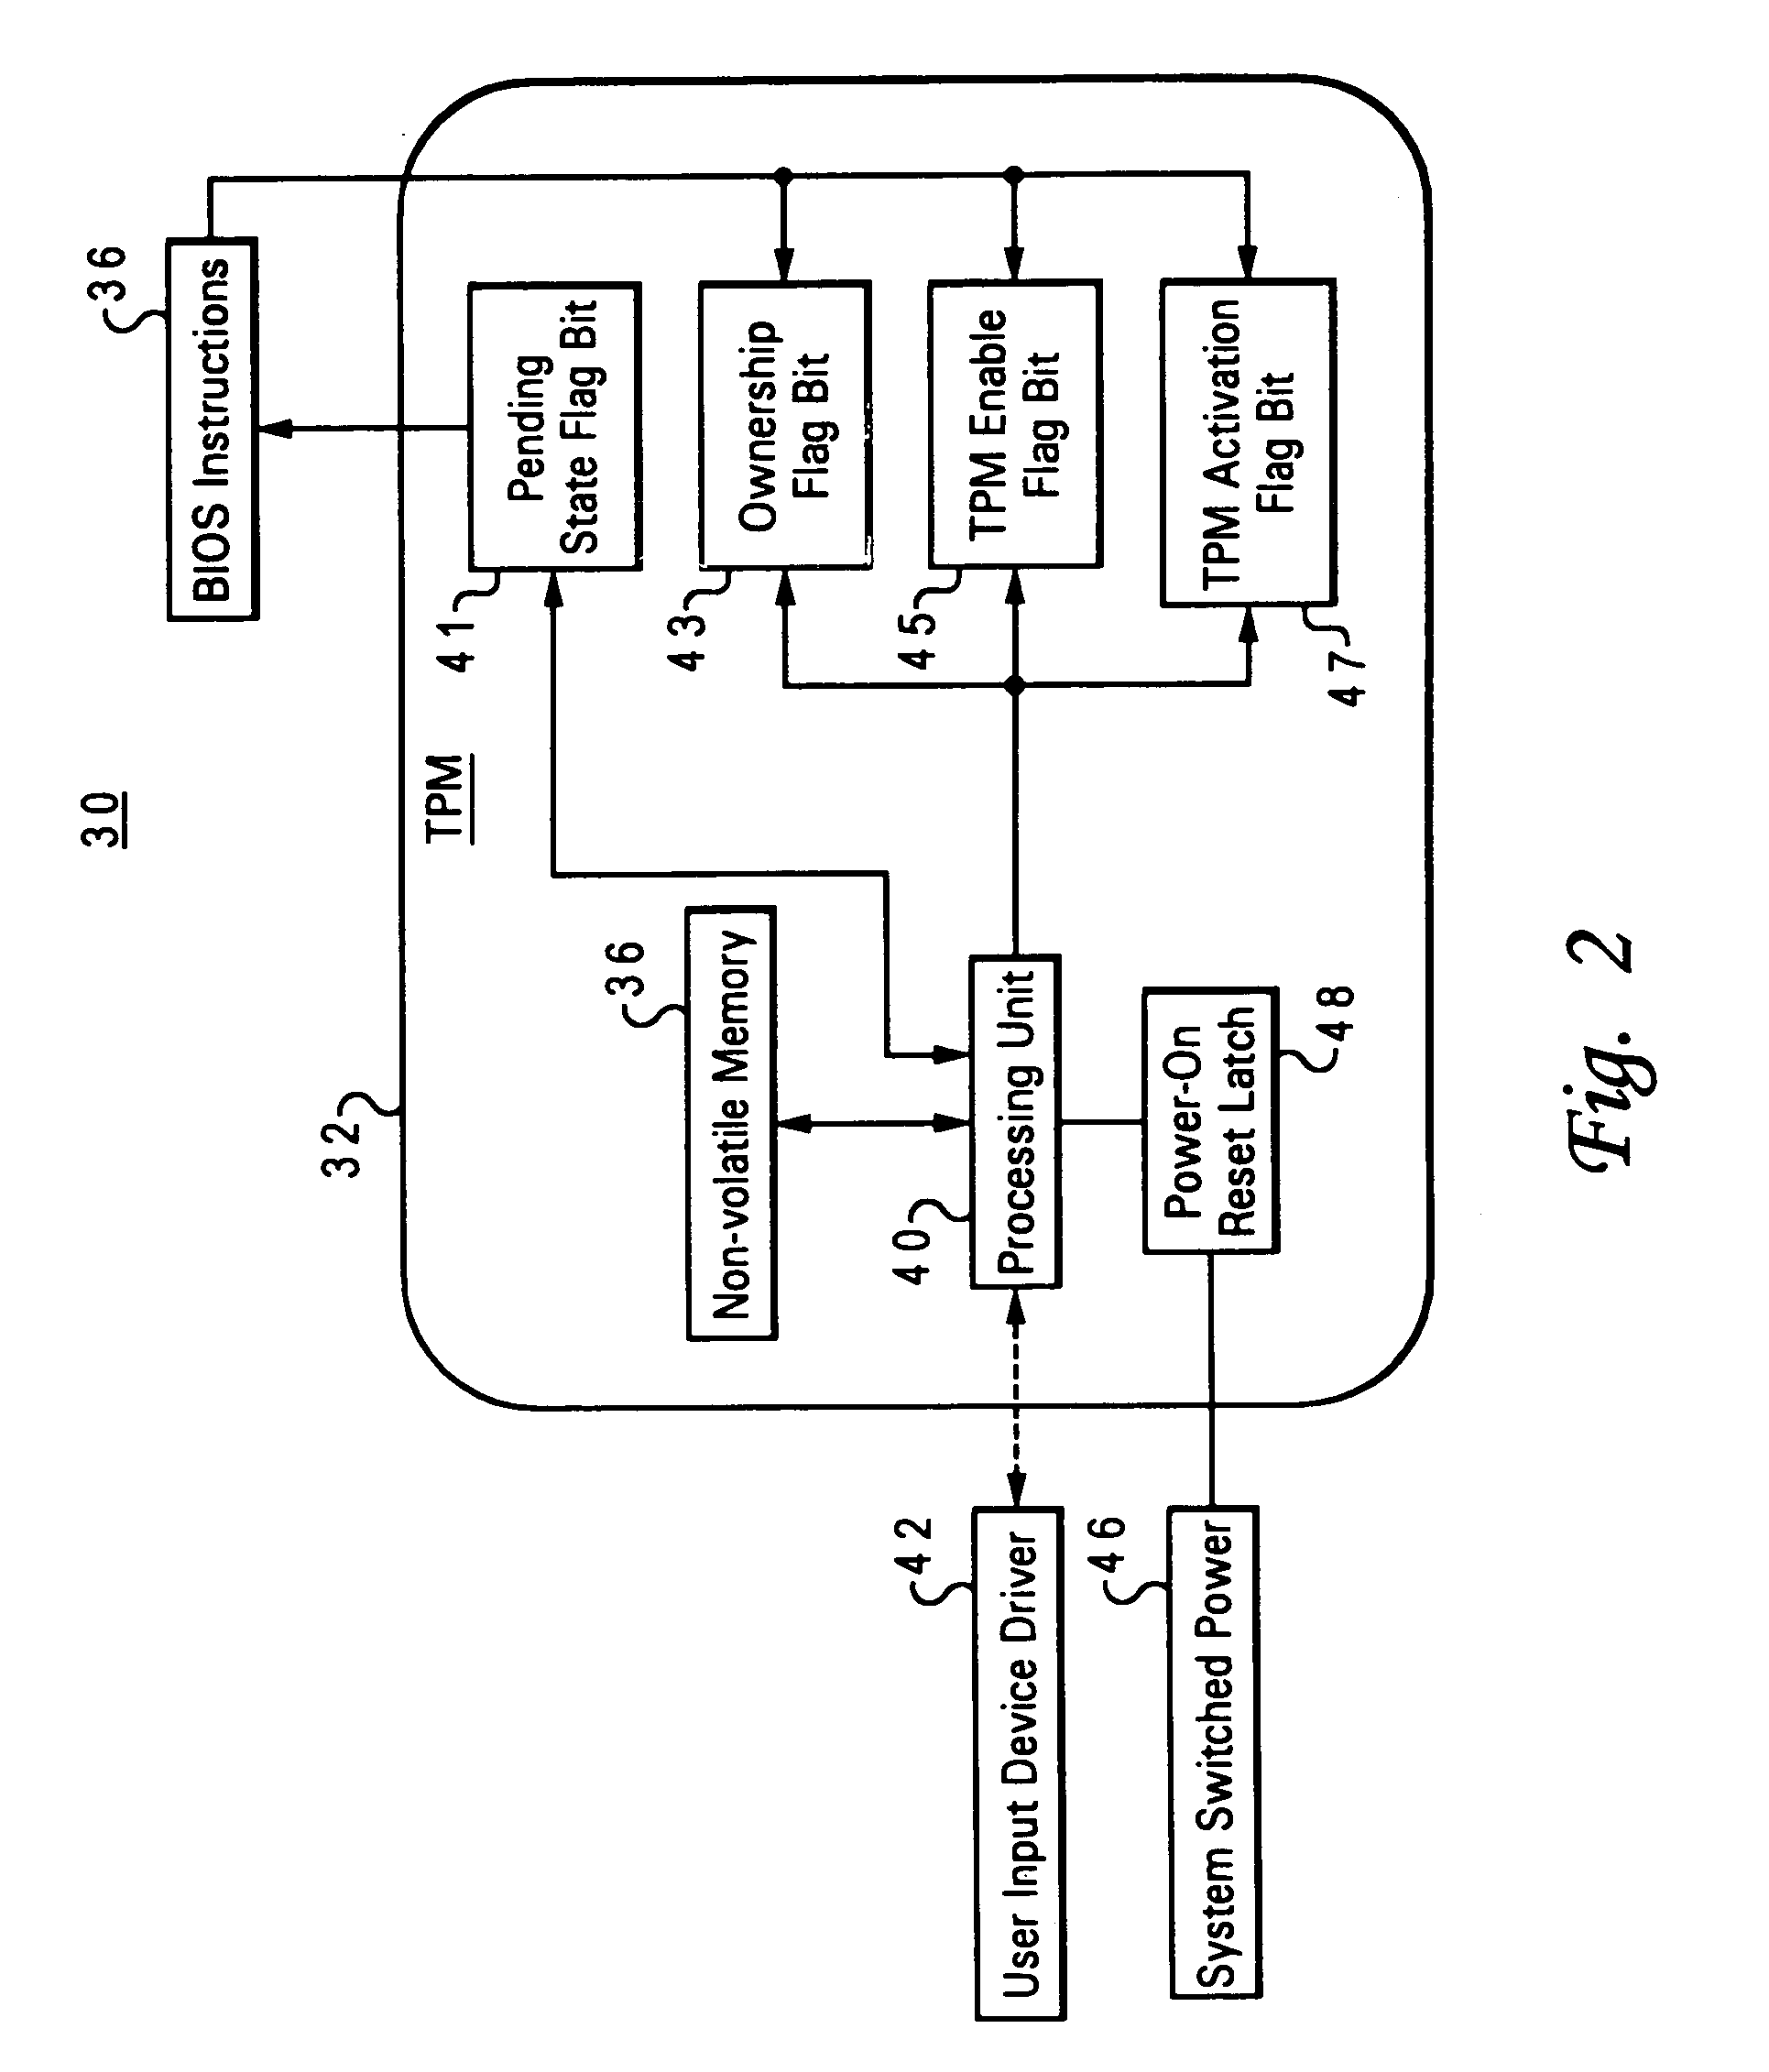 Method and system for securing enablement access to a data security device